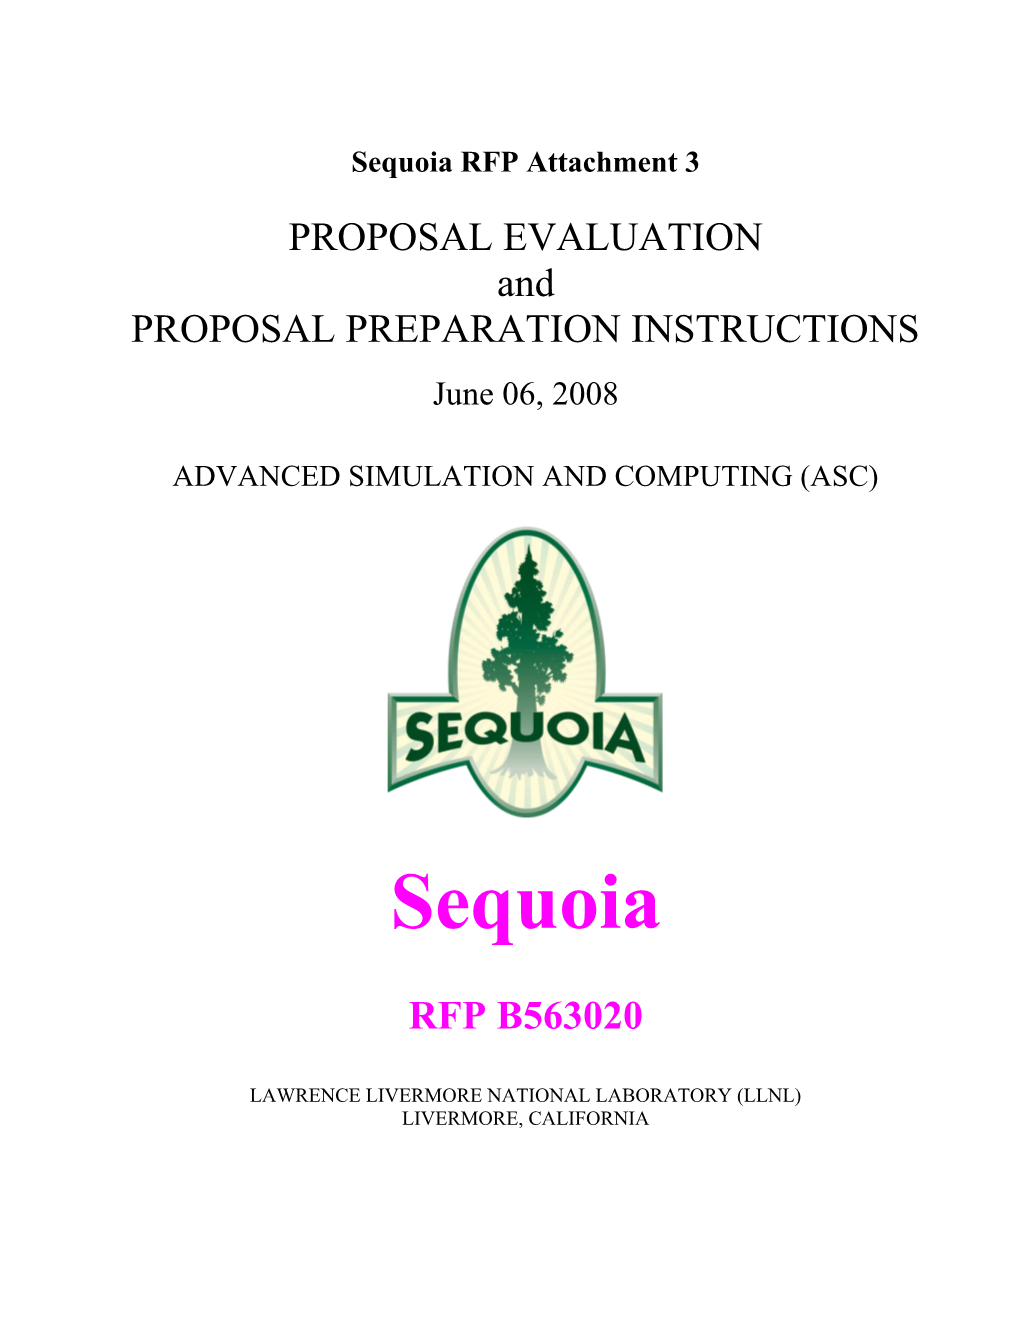 Proposal Eval and Prep Instructions